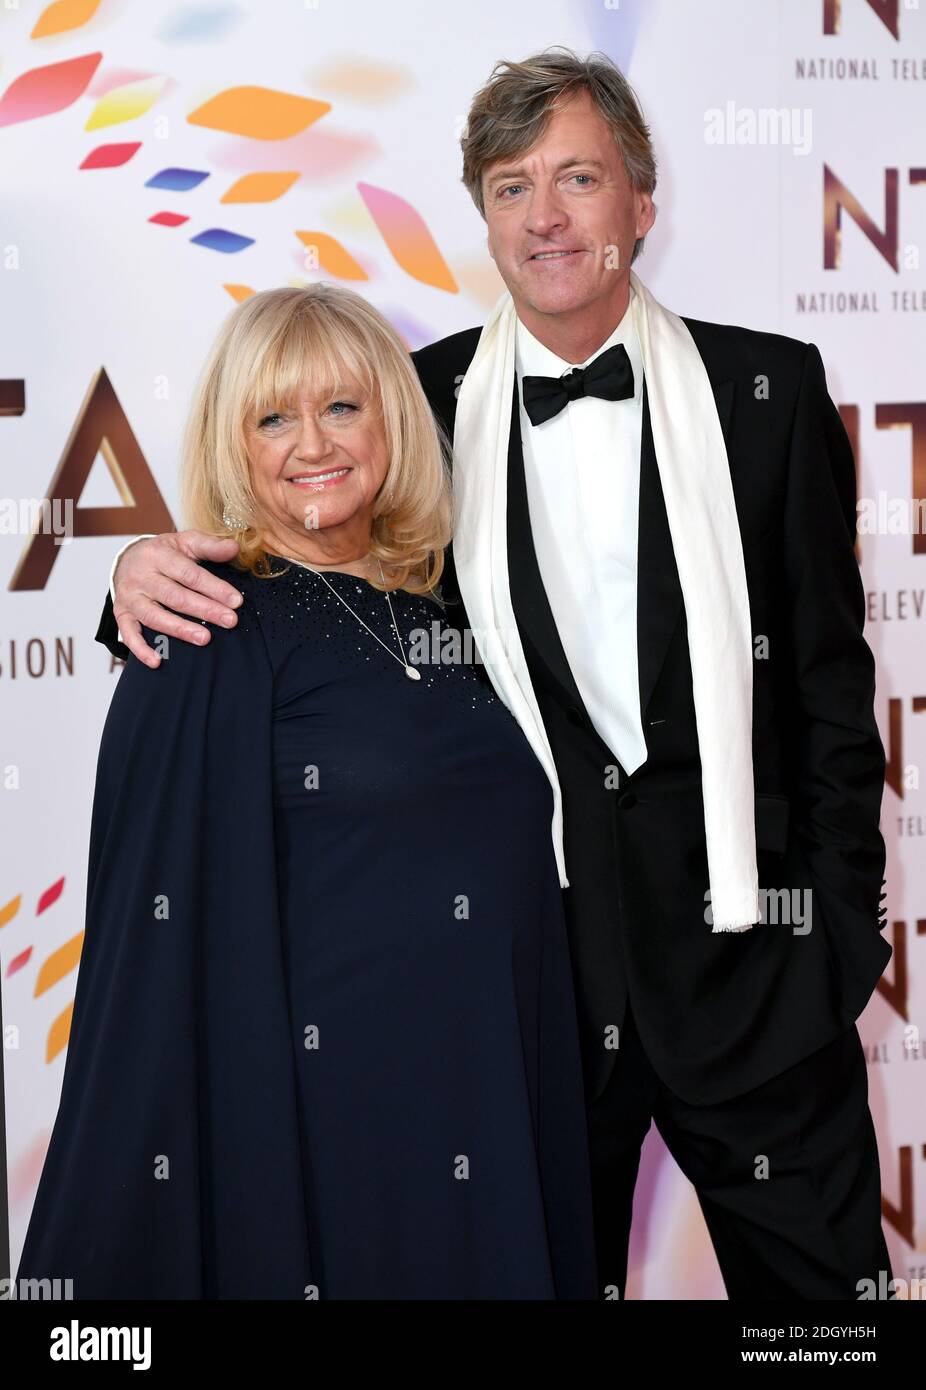 Richard Madly and Judy Finnigan in the Press Room at the National Television Awards 2020 held at the O2 Arena, London. Photo credit should read: Doug Peters/EMPICS Stock Photo